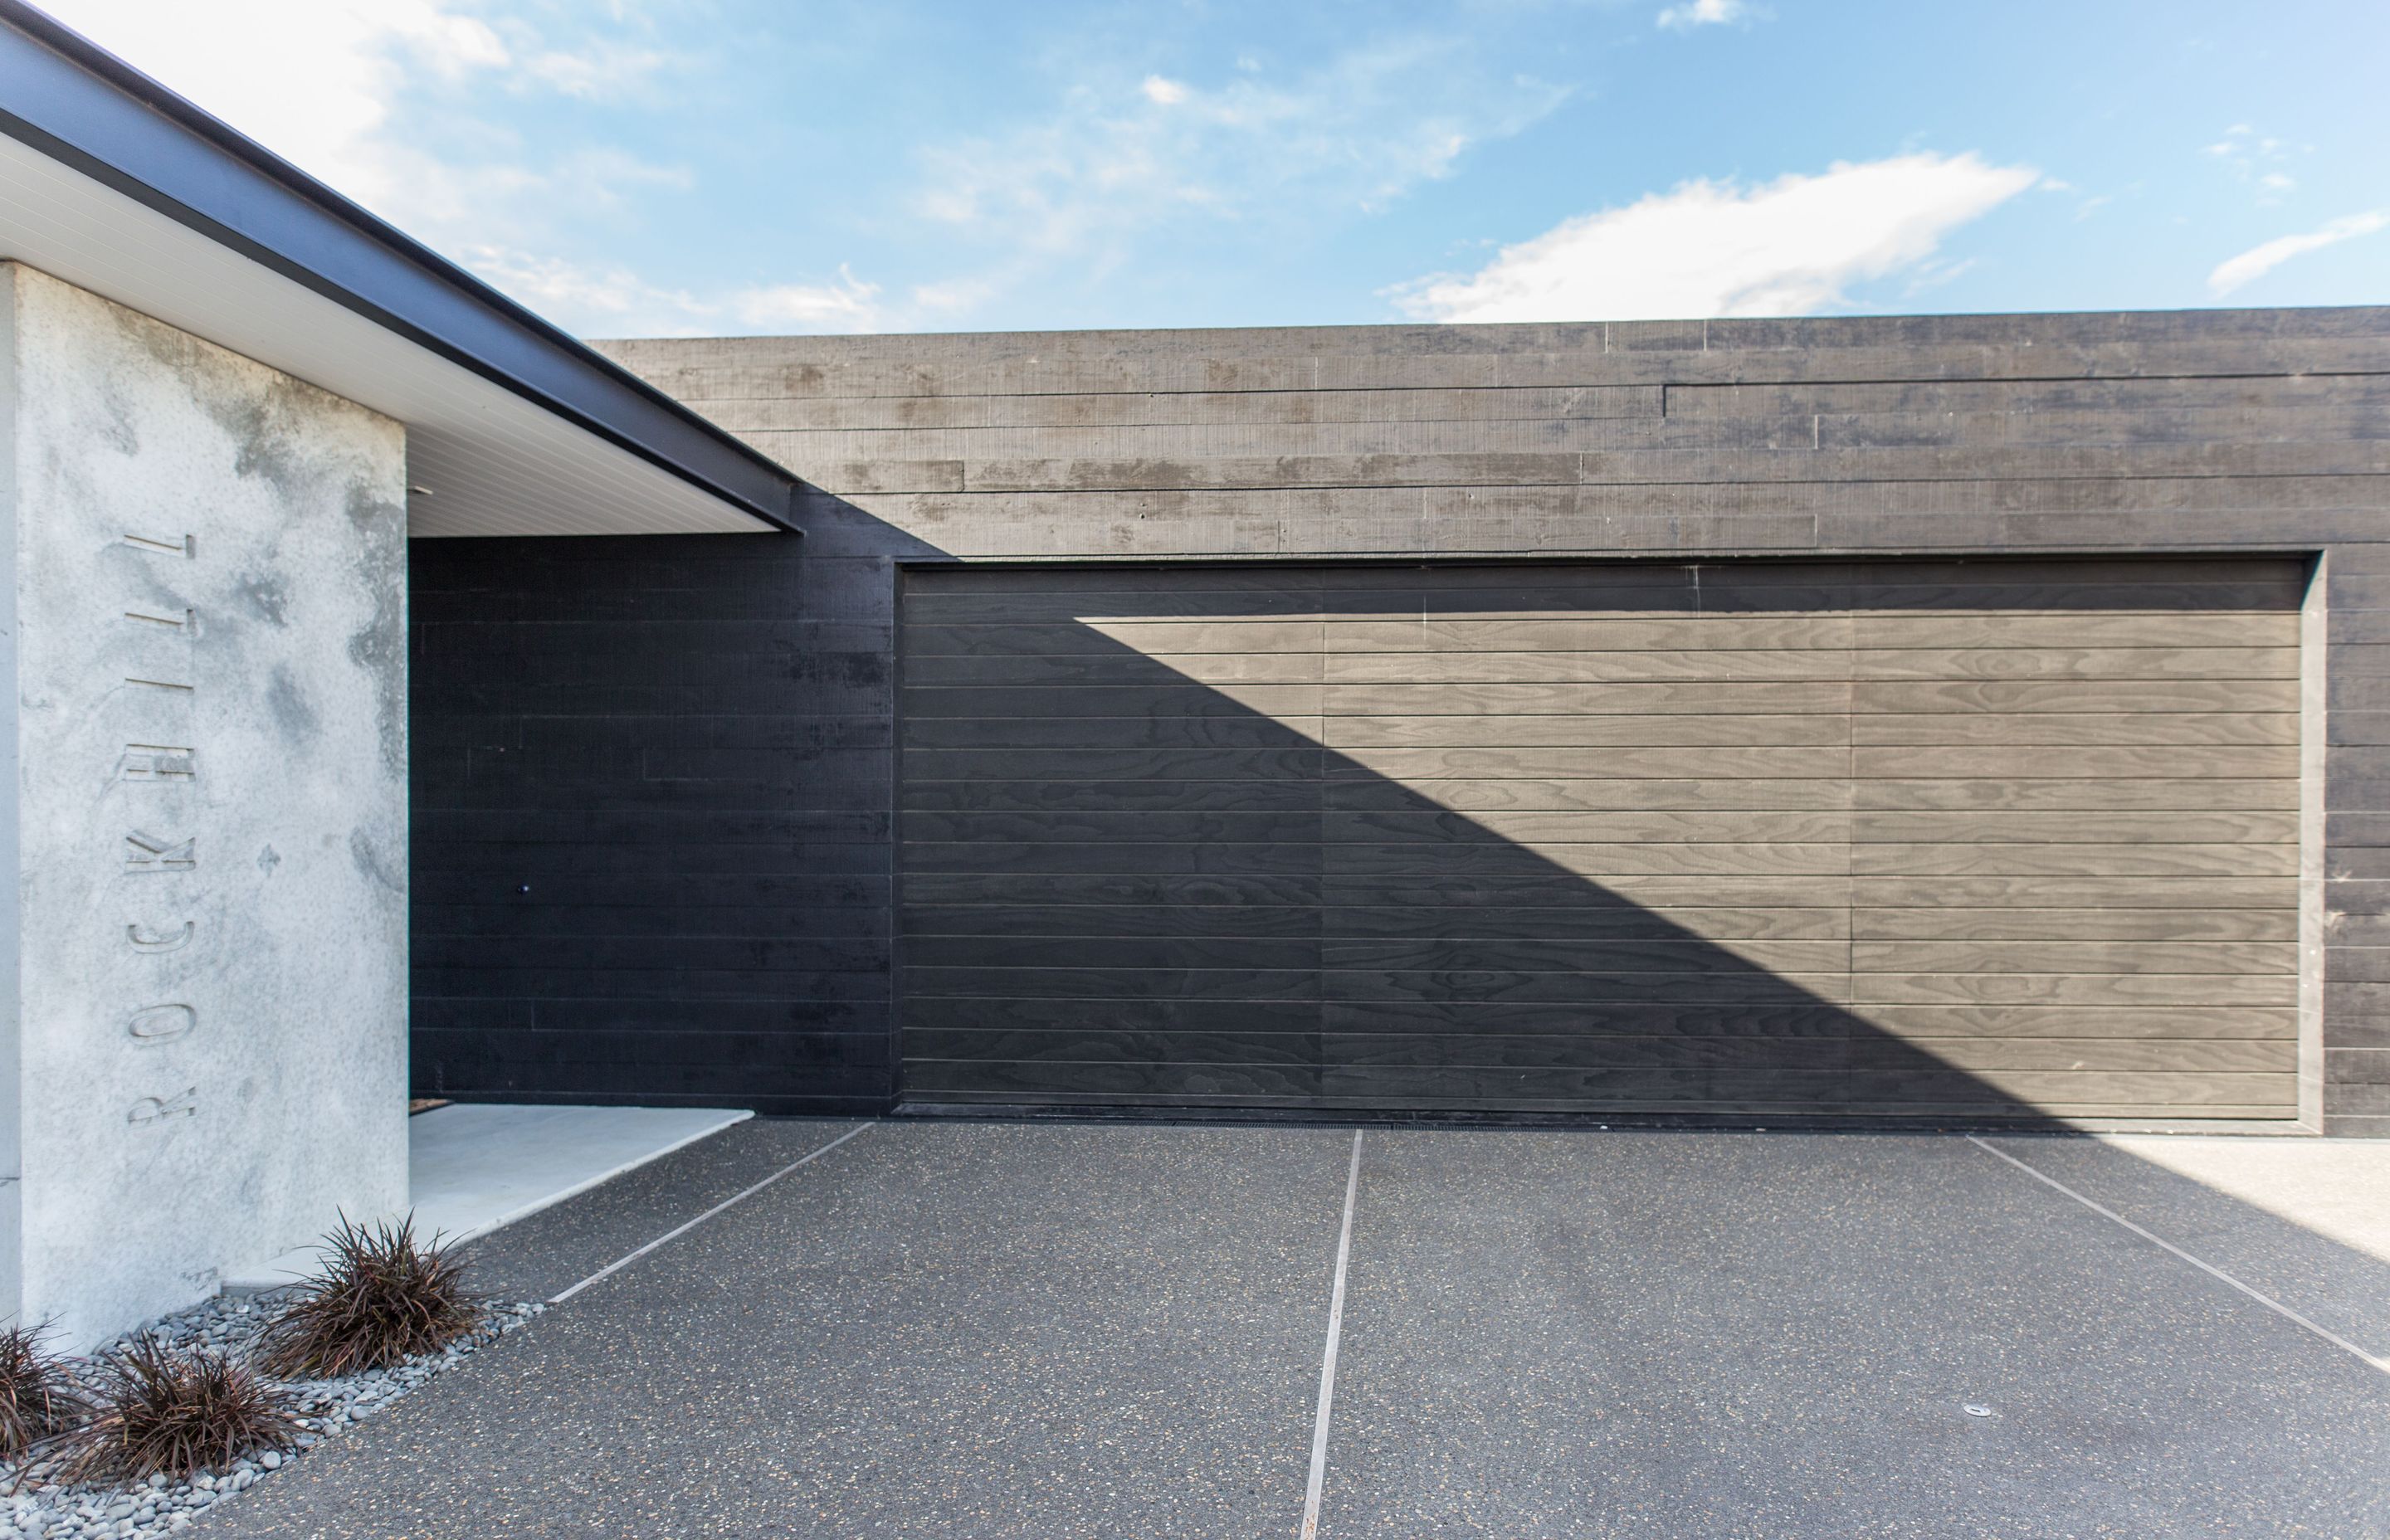 Weir Residence: concrete in contrast